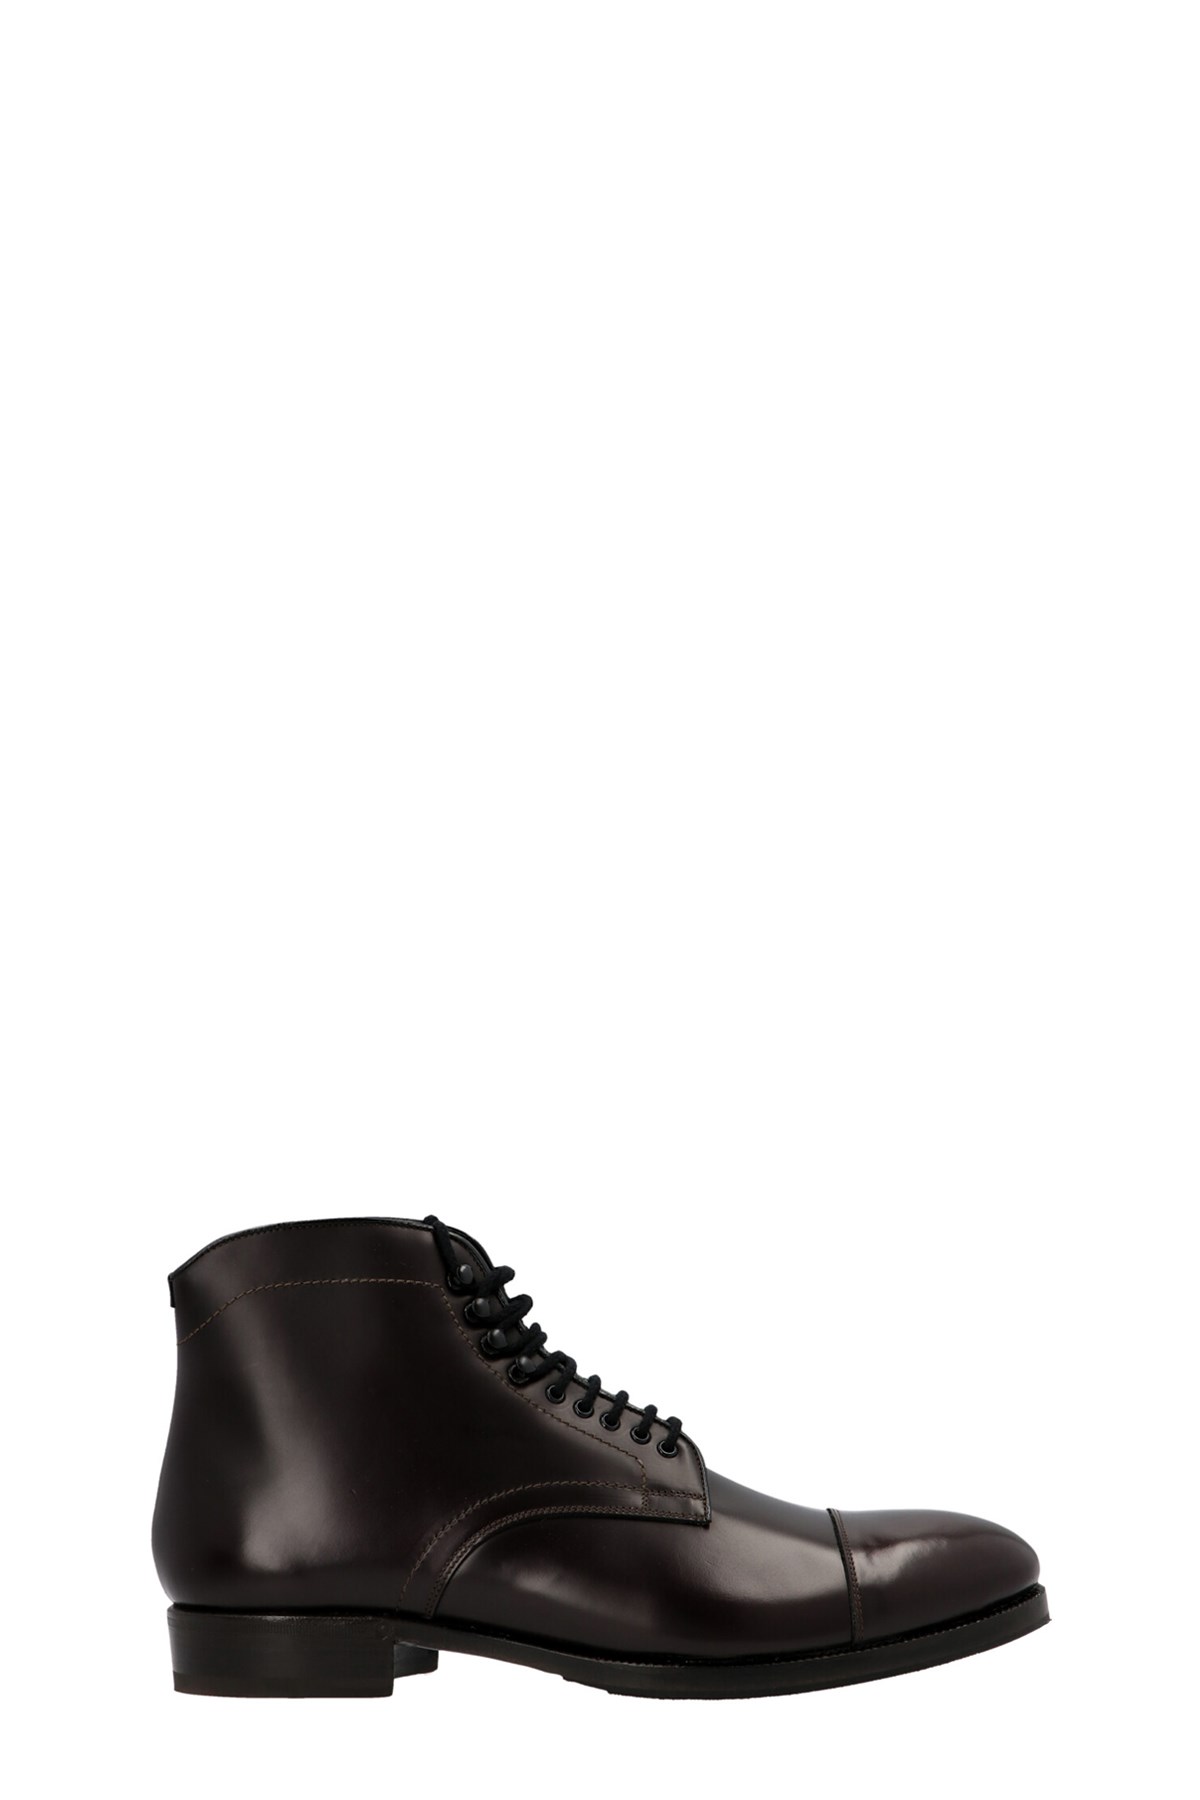 LIDFORT Lace Up Ankle Boots